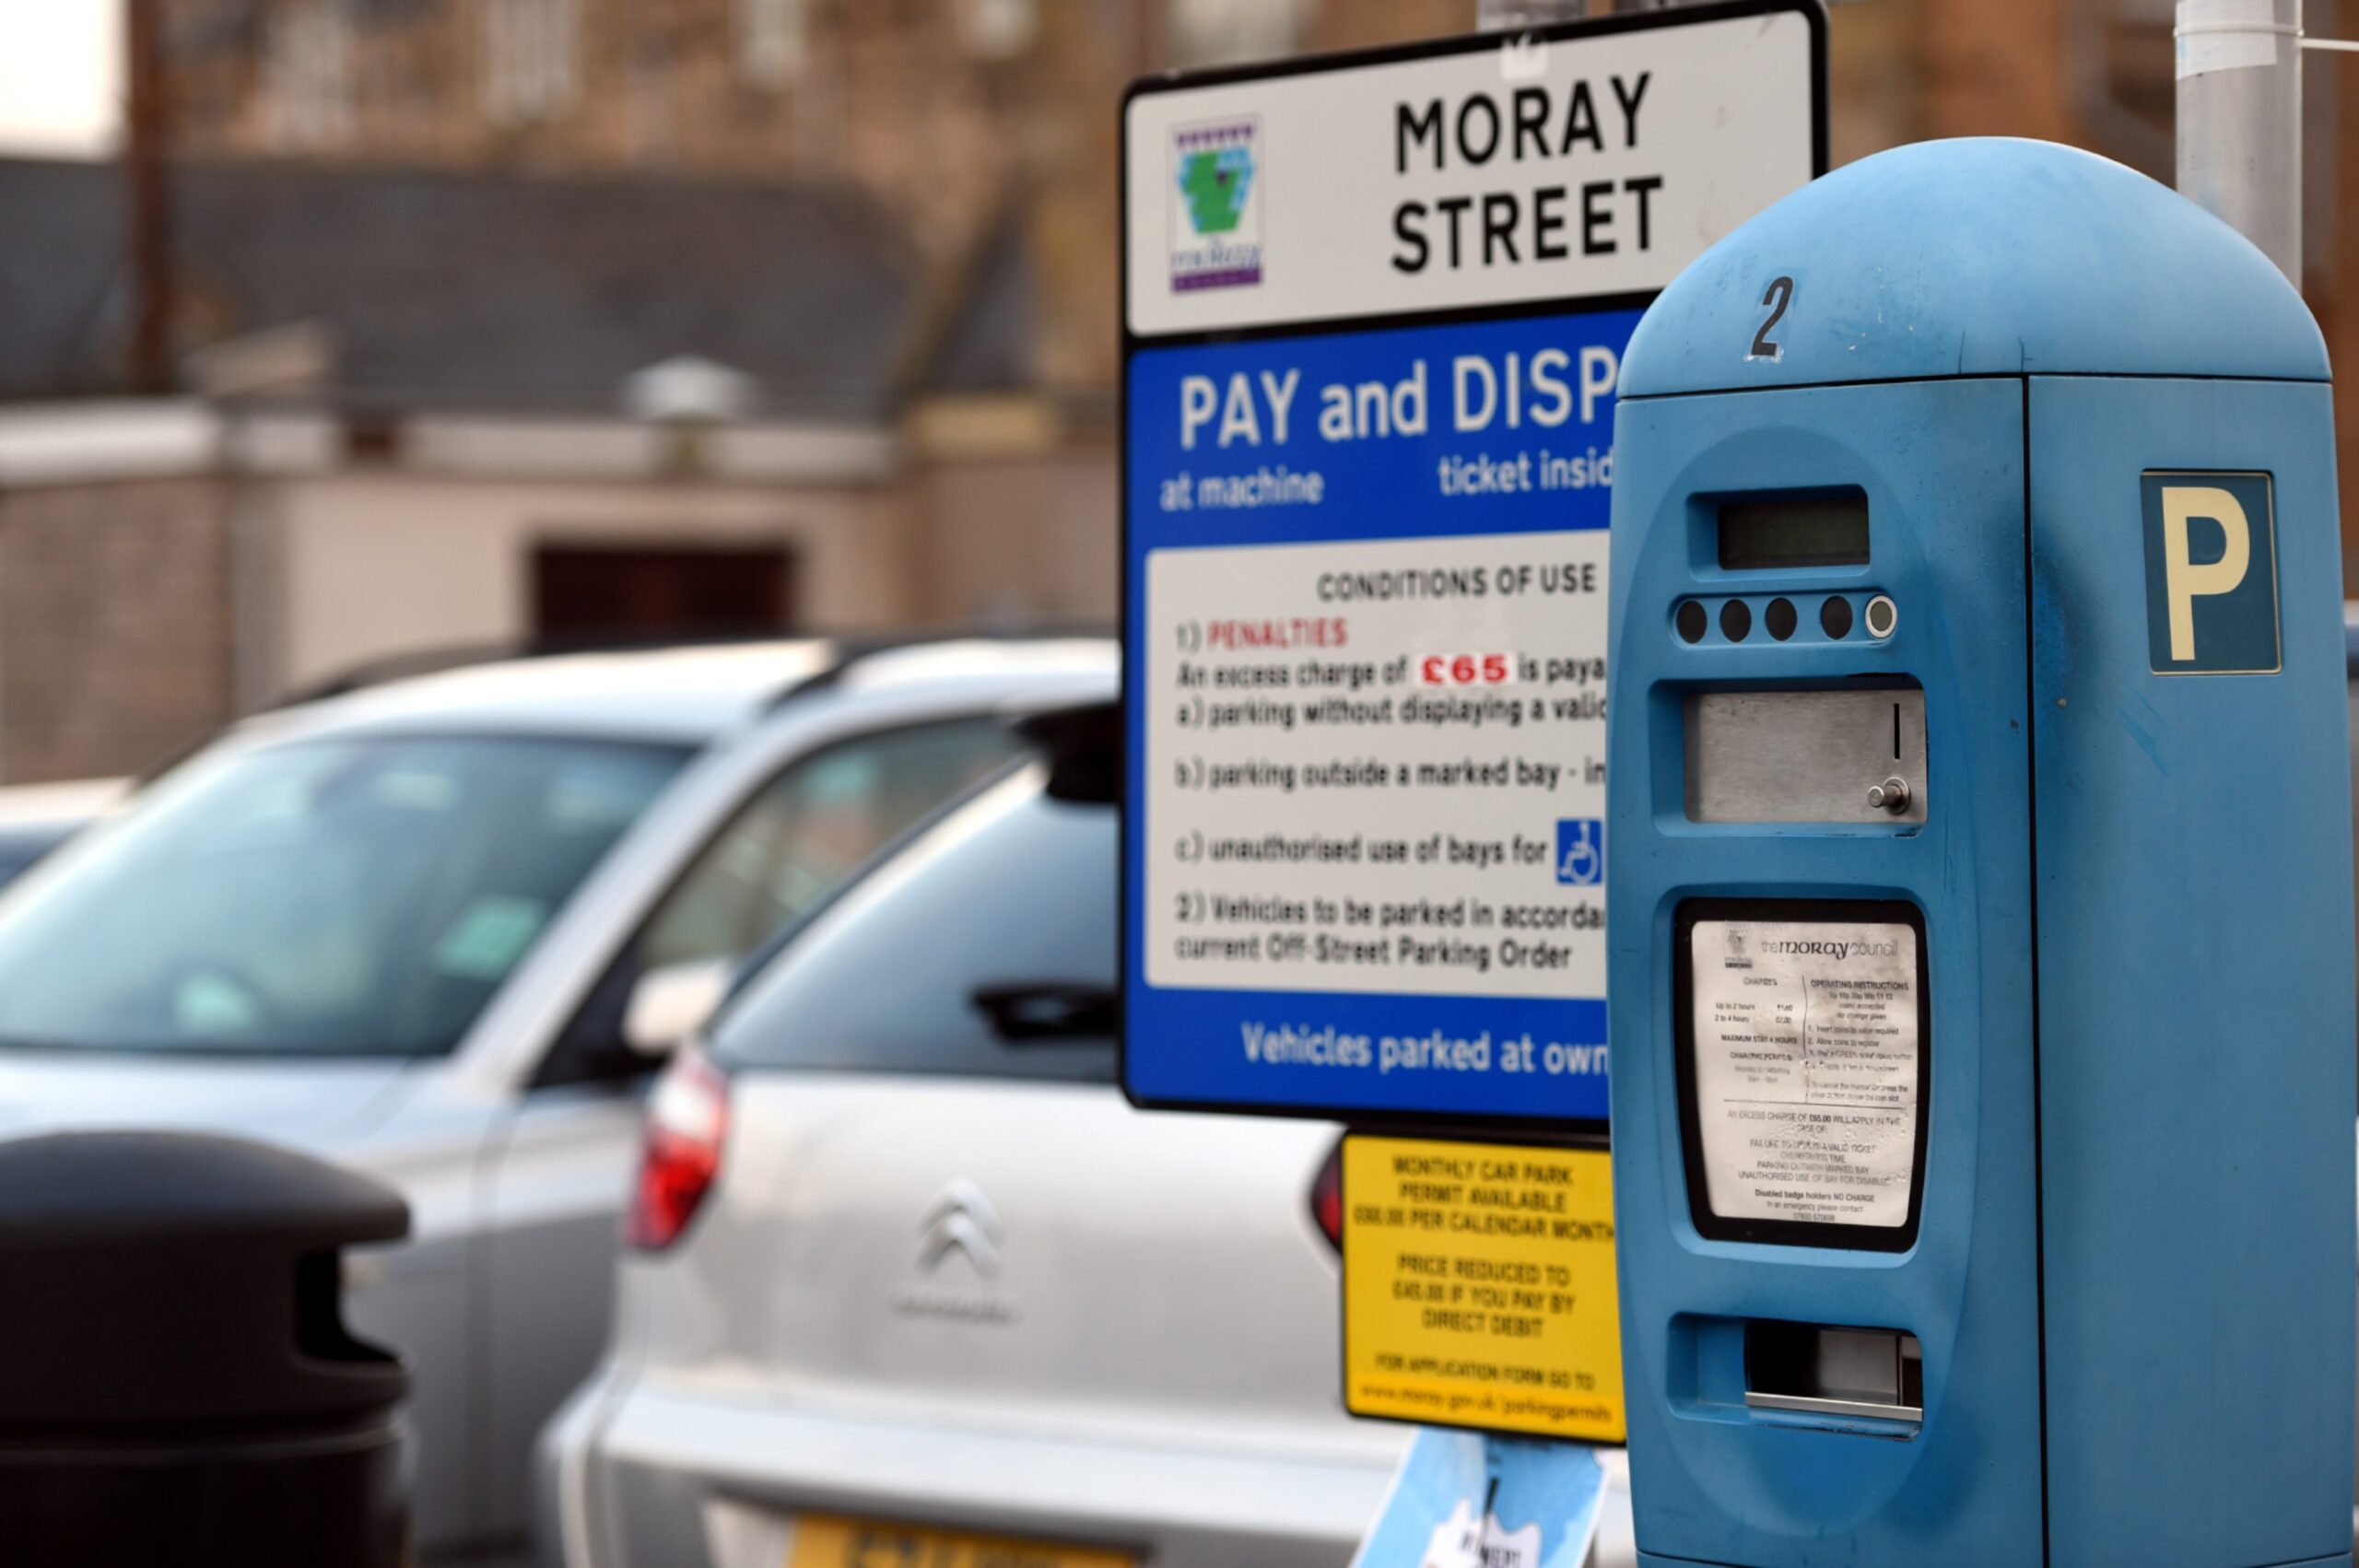 Pay and display machine at Moray Street in Elgin.